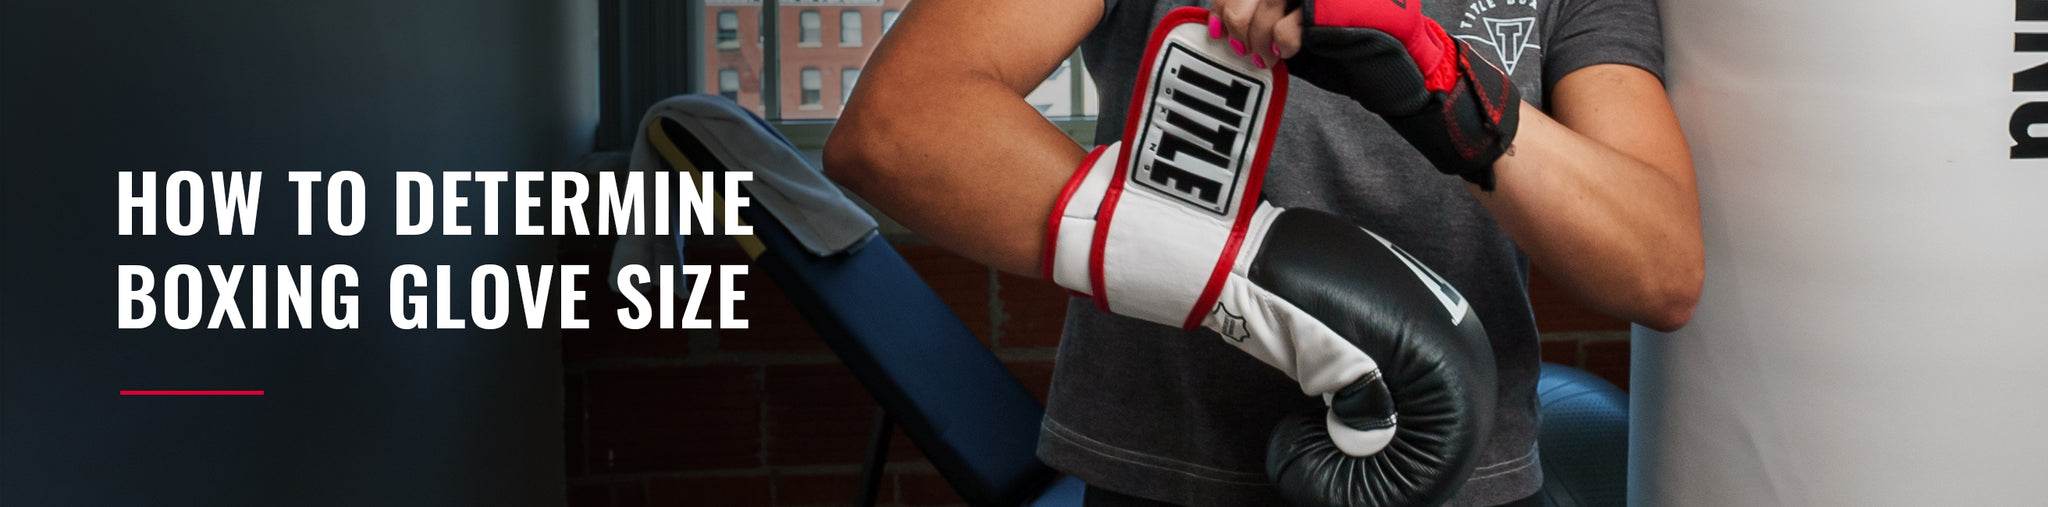 How to determine boxing glove size